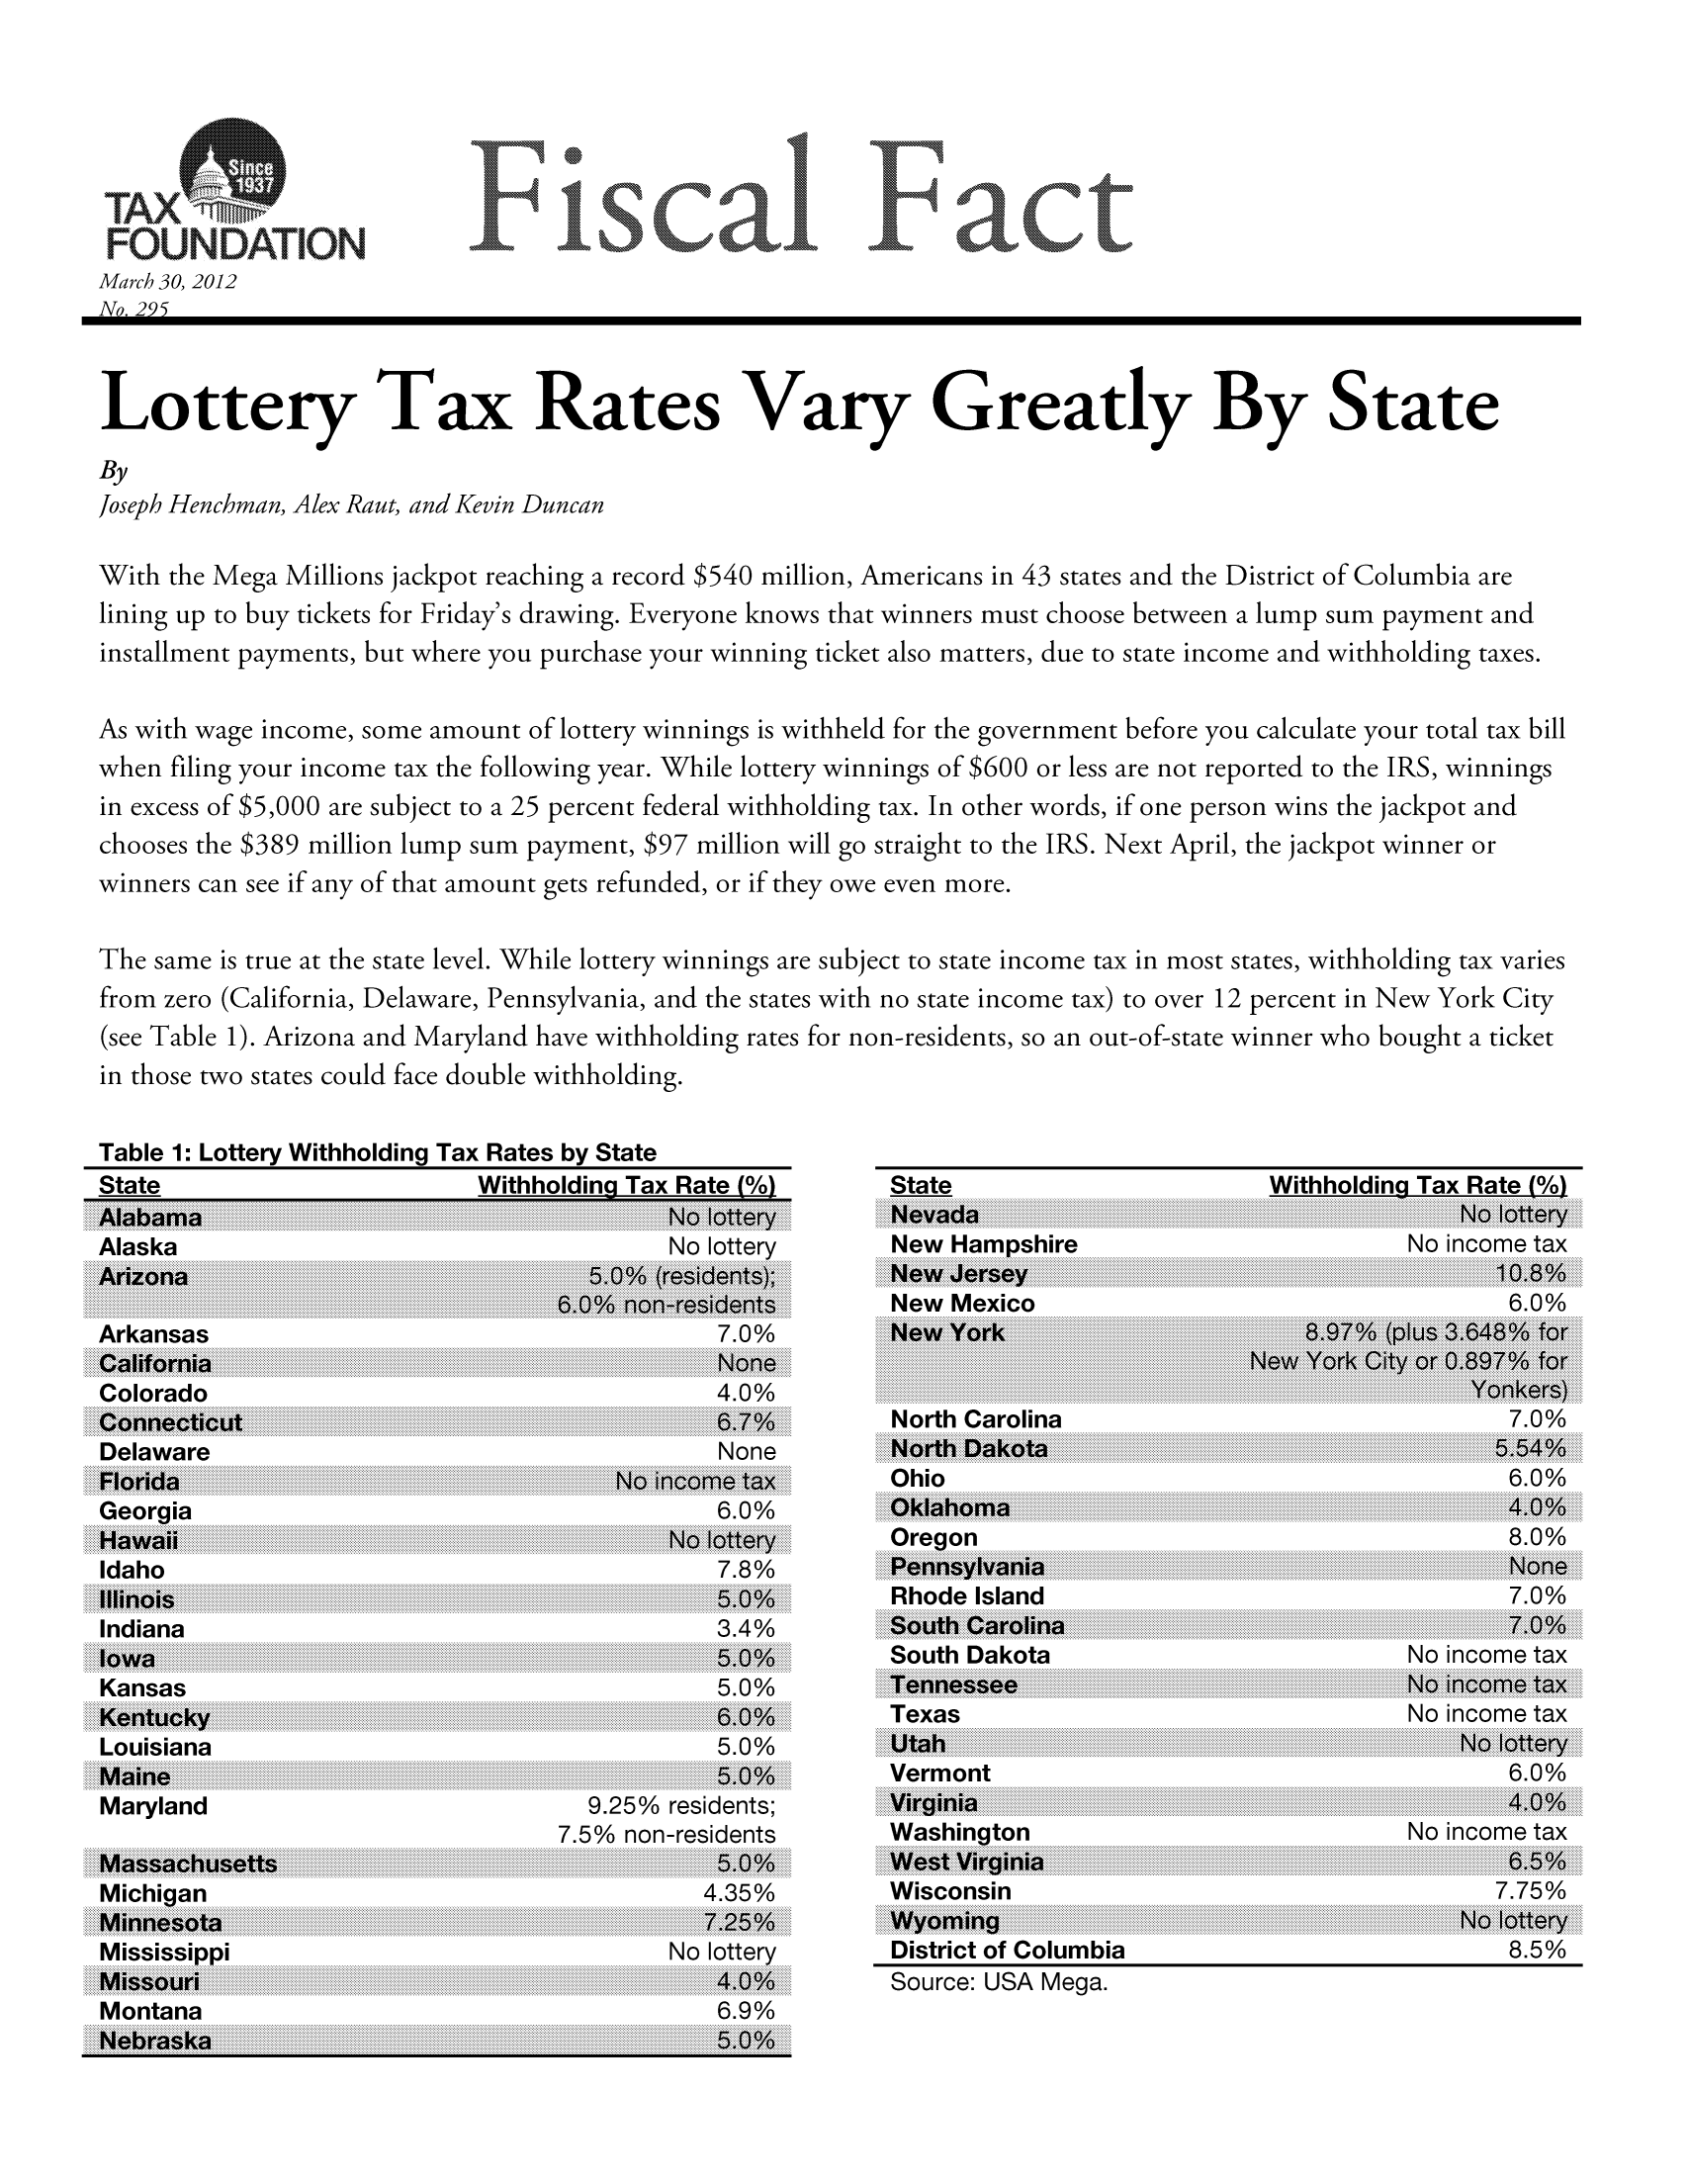 handle is hein.taxfoundation/ffcjfxz0001 and id is 1 raw text is: FOUNDATION1
March 30, 2012
No. 295

Lottery Tax Rates Vary Greatly By State
By
Joseph Henchman, Alex Raut, and Kevin Duncan
With the Mega Millions jackpot reaching a record $540 million, Americans in 43 states and the District of Columbia are
lining up to buy tickets for Friday's drawing. Everyone knows that winners must choose between a lump sum payment and
installment payments, but where you purchase your winning ticket also matters, due to state income and withholding taxes.
As with wage income, some amount of lottery winnings is withheld for the government before you calculate your total tax bill
when filing your income tax the following year. While lottery winnings of $600 or less are not reported to the IRS, winnings
in excess of $5,000 are subject to a 25 percent federal withholding tax. In other words, if one person wins the jackpot and
chooses the $389 million lump sum payment, $97 million will go straight to the IRS. Next April, the jackpot winner or
winners can see if any of that amount gets refunded, or if they owe even more.
The same is true at the state level. While lottery winnings are subject to state income tax in most states, withholding tax varies
from zero (California, Delaware, Pennsylvania, and the states with no state income tax) to over 12 percent in New York City
(see Table 1). Arizona and Maryland have withholding rates for non-residents, so an out-of-state winner who bought a ticket
in those two states could face double withholding.

Table 1: Lottery Withholding Tax

State
................................................................................
................................................................................
................................................................................
................................................................................
...............................................
................................................
..........................................
..........................................
.....                .       ..  .    ..........................................
..........................................
.. ... .. ..........................................
.........................................
................................................................................
................................................................................
................................................................................
New Hampshire
................................................................................
................................................................................
................................................................................
...............................
................................                               .................

Withholding Tax Rate M%)
No income tax
10.8%
6A/

Arkansas
Cal..   ifo    ia. [[[[[[[[[[[[[[[[[[[[[[[[[[[
Colorado
Delaware
Georgia
. . . . . . . . ....... ... .......................................... .
................................................ ..................................................
H...............................
Idaho
Indiana
Kansas
. . . . . . . . . . .......................................................
Louisiana
Maryland
.Michigan             ..................
Mississippi
..............................................................................................
Montana
N    e  b r a sa..................................... ........................
.................................... .... ............................. .
L  ouiiii i  i a n a iiiiiiiiiiiiiiiiiiiiiiiiiii

...............................................................................................................................
.............................................................................................................................. ..
...............................................................               .   . .  . .  . .  . .  . . .
...............................................................................................................................
.............................................................................................................................. ..
4.0%
........................................................................................
...............................................................................................................................
.............................................................................................................................. ..
...............................................................................................................  . .........
...............................................................iiiiiiiiiiiiiiiiiiiiiiiiiiiii iiia i~      ii
...............................................................
.............................................................................................................................. ..
.............................................................................................................................. ..
.......................................................................................
.............................................................................iiiiiiiiiiiiiiiiiiiiiiiii .........~ i

North Carolina
..................................................................................................
..................................................................................................
..................................................................................................
..................................................................................................
...........
..............................
..................................................................................................
..................................................................................................
..................................................................................................
..................................................................................................
Ohio
..................................................................................................
..................................................................................................
..................................................................................................
..................................................................................................
.................................................................
..................................................................
...............................................
................................................
................................................
...............................................
..............................................
w       .... o   :       a     :**************************************************************
..................................................................................................
..................................................................................................
..................................................................................................
Oregon
..................................................................................................
..................................................................................................
..................................................................................................
................................................................................................................................
...................................
...........................
s M*.a::n:i::a:*.......................................................................,
.....  ..  ......................
Rhode Island
..................................................................................................
..................................................................................................
..................................................................................................
.................................
...........................
01A
...........................
............................
...........................
.. ............................
...........................
......  ............. 8  ...........................
..................................................................................................
..................................................................................................
..................................................................................................
South Dakota
..................................................................................................
..................................................................................................
..................................................................................................
..................................................................................................
..................................................................
................................
............................................
.............................................
.............................................
..................................................................................................
..................................................................................................
..................................................................................................
Texas
..................................................................................................
..................................................................................................
..................................................................................................
..................................................................................................
:*i*ilj:*&  i: *******..........................................................................................................................................
.....................................................................
........................................................................
......................................                              .....
..................................................................................................
..................................................................................................
..................................................................................................
Vermont
..................................................................................................
..................................................................................................
..................................................................................................
..................................................................................................
..............................
............................................................
.....................................................
:...Jr               j
::.:i:i i C-
...................................................................
Washington
..................................................................................................
..................................................................................................
..................................................................................................
.....................................
...................................
..................................
...................................
...................................
r        in      j        ..................................
....      ..........      ...................................
.....  .  ........... a  ...................................
..................................   ....      ...................................................
................................
Wisconsin
..................................................................................................
..................................................................................................
..................................................................................................
..................................................................................................
..............................
.... .       Y    o                            ................................
. ................................
...................................................
..      .....  ..............     ....................................................
....................................................
District of Columbia
Source: USA Mega.

I.U%
............................................................................................................................................................................
............................................................................................................................................................................
............................................................................................................................................................................
............................................................................................................................................................................
..........................................................................................................................................................
..............................................................................................................................
..............................................................................................................................
..............................................................................................................................
..............................................................................................................................  ...........  ....
..............................................................................................................................  ..........
..............................................................................................................................  ...........  ..  ....  ..  .  .  ......
..............................................................................................................................  ..............  .......
...........................................................................................................................................  ..  ...        ......
..............................................................................................................................
5:54*--Y--:::O-:************
...............................................................................................
............................................................................................................................................................................
............................................................................................................................................................................
............................................................................................................................................................................
............................................................................................................................................................................
6.0%
............................................................................................................................................................................
............................................................................................................................................................................
............................................................................................................................................................................
............................................................................................................................................................................
..............................................................................................................................
..............................................................................................................................
.................................................................................................................................
..............................................................................................................................                            ........
..............................................................................................                                                       H
...............................................................................................  ...............................                     .  I  .  ......
..................................                           .  .   ......
.................................................................................................................................                    .  .   ......
................................................................................................................................                        ..  ......
.................................................................................................................................       4     0      .  ...  ......
............................................................................................................................................................................
............................................................................................................................................................................
............................................................................................................................................................................
8.0%
............................................................................................................................................................................
............................................................................................................................................................................
............................................................................................................................................................................
............................................................................................................................................................................
..............................................................................................................................               ......................
....................................................................................................................................
........................................................................................................................
..............................................................................................................................                        .      .....
..............................................................................................................................
.................  ......
.............. e  .........
............................................................................................................................................................................
............................................................................................................................................................................
............................................................................................................................................................................
7.0%
............................................................................................................................................................................
............................................................................................................................................................................
............................................................................................................................................................................
.........................................................................................................              ..................   ...
...............................................................................................
...............................                     .               .....
................................................................................................................................................  ...       ......
.............................................................................................................................. *** ...............  ...  .  ......
................................................................................................................................................  ...       ......
................................................................................................................................................  ...  .    ......
................................................................................................................................................  ...       ......
...............................................................................................  .............................................  ...  .      ......
................................................................................................................................................  ...       ......
.......................................................................................................................................
................................  .......                  ...............................                                    ......
..........................................................................................................
............................................................................................................................................................................
............................................................................................................................................................................
............................................................................................................................................................................
............................................................................................................................................................................
No income tax
............................................................................................................................................................................
............................................................................................................................................................................
............................................................................................................................................................................
............................................................................................................................................................................
...............................................................................................
..........................................................................................                                              .  .......  .....  ..........
...............................................................................................
..............................................................................................                                         ..: .......  ................
...............................................................................................
..............................................................................................  .......                                                 X   : ......
...........
In                            ...            ......
...............................................................................................  ...           ...
............................................................................................................................................................................
............................................................................................................................................................................
............................................................................................................................................................................
No income tax
............................................................................................................................................................................
............................................................................................................................................................................
............................................................................................................................................................................
............................................................................................................................................................................
..............................................................................................
..........................................................................................                                                .      ..................
................................................................................    .....
................................................................................
..............................................................................................................................
................
..............................................................              .............................................
.............   ........
..................................................... ..
............................................................................................................................................  .  ....  ......  ......
.............................................................................................................................................  .  ...  .....  .....
6.0%
............................................................................................................................................................................
............................................................................................................................................................................
............................................................................................................................................................................
..............................................................................................................................................................  ......
..............................................................................................................................................              ......
............................................................................................................................................
............................................................................................................................ .
.........................................................................................................................
.....                                     ......
.......................................                     ...............................
........................................................................................................................................................    ......
............................................................................................................................................................................
............................................................................................................................................................................
............................................................................................................................................................................
No income tax
............................................................................................................................................................................
............................................................................................................................................................................
............................................................................................................................................................................
...............................................................................................................................................................  ......
..............................................................................................................................  ........ ******             ......
..............................................................................................................................  ..............
...............................................................................................................................

.............................................................................................................................................................................................................................................................................
............................................................................................................................................................................................................................................................................
.............................................................................................................................................................................................................................................................................

F 0
iscal Fact


